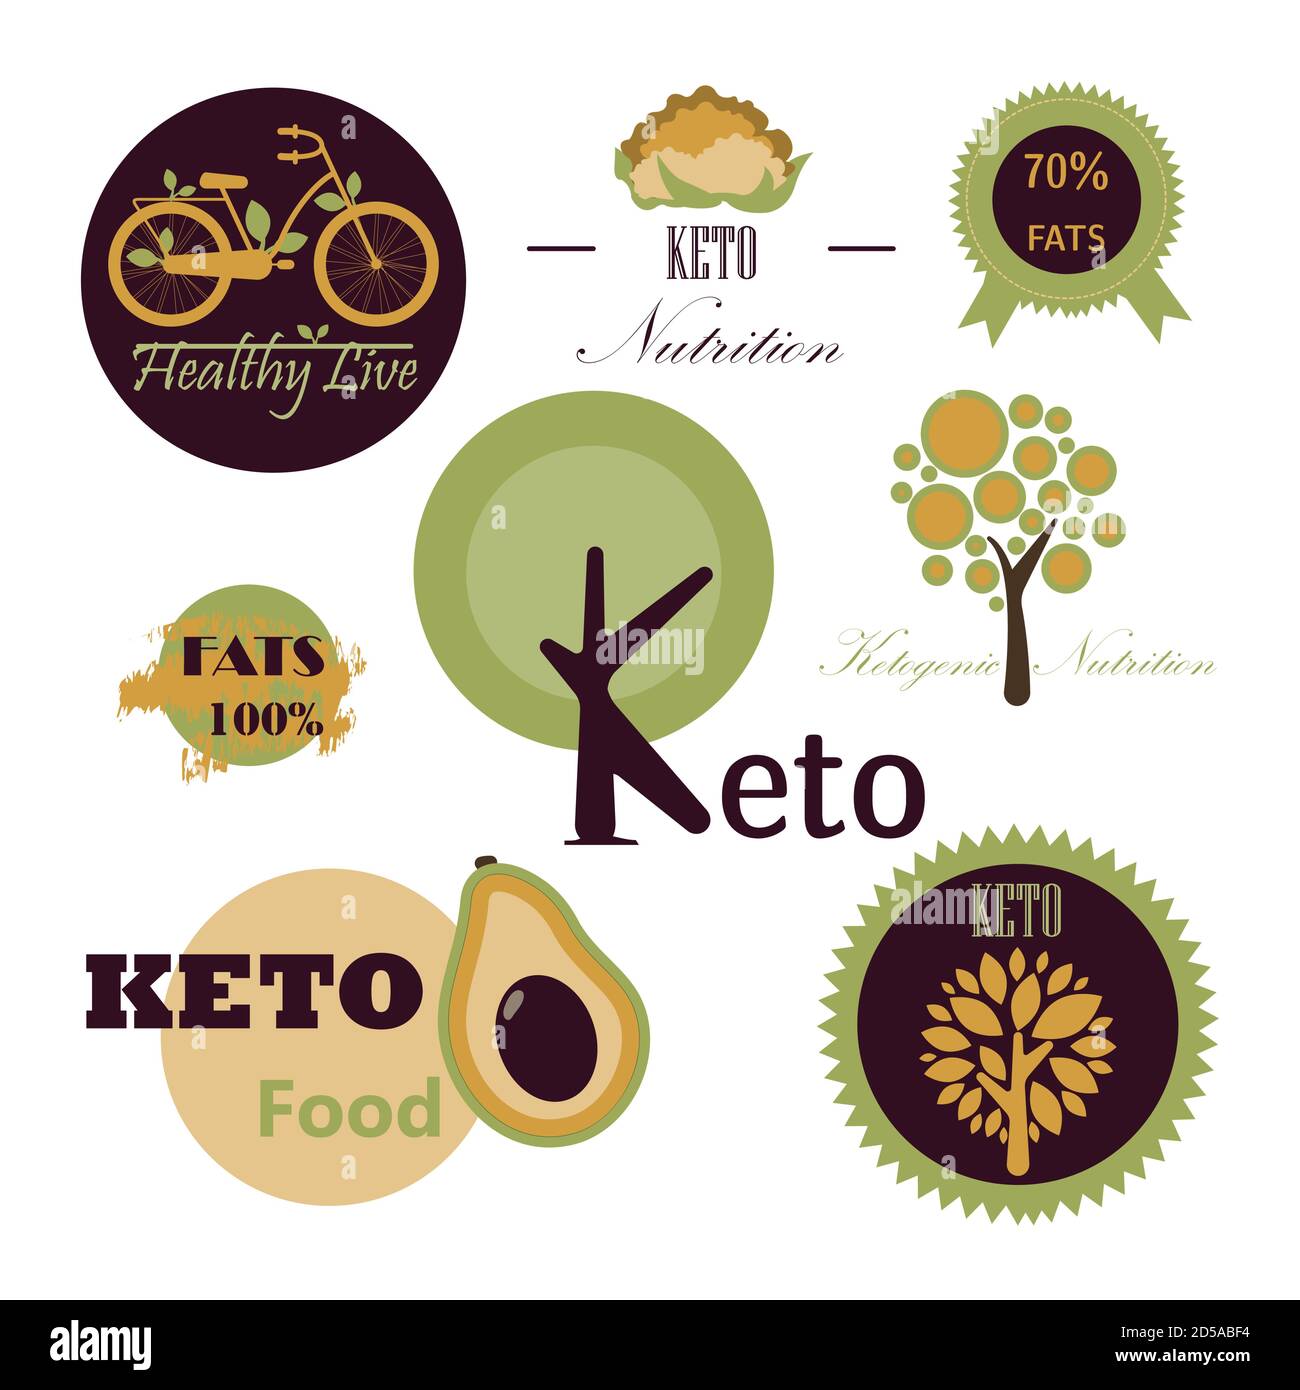 Logos of nutrition on the keto diet. Foods, calculation of water, beverages, fat, protein and carbohydrates for a healthy diet according to the keto diet. Infographics of healthy food. A brochure for familiarization with and compliance with the nutrition plan. Poster for advertising, poster or banner, for people who are losing weight. Stock Vector